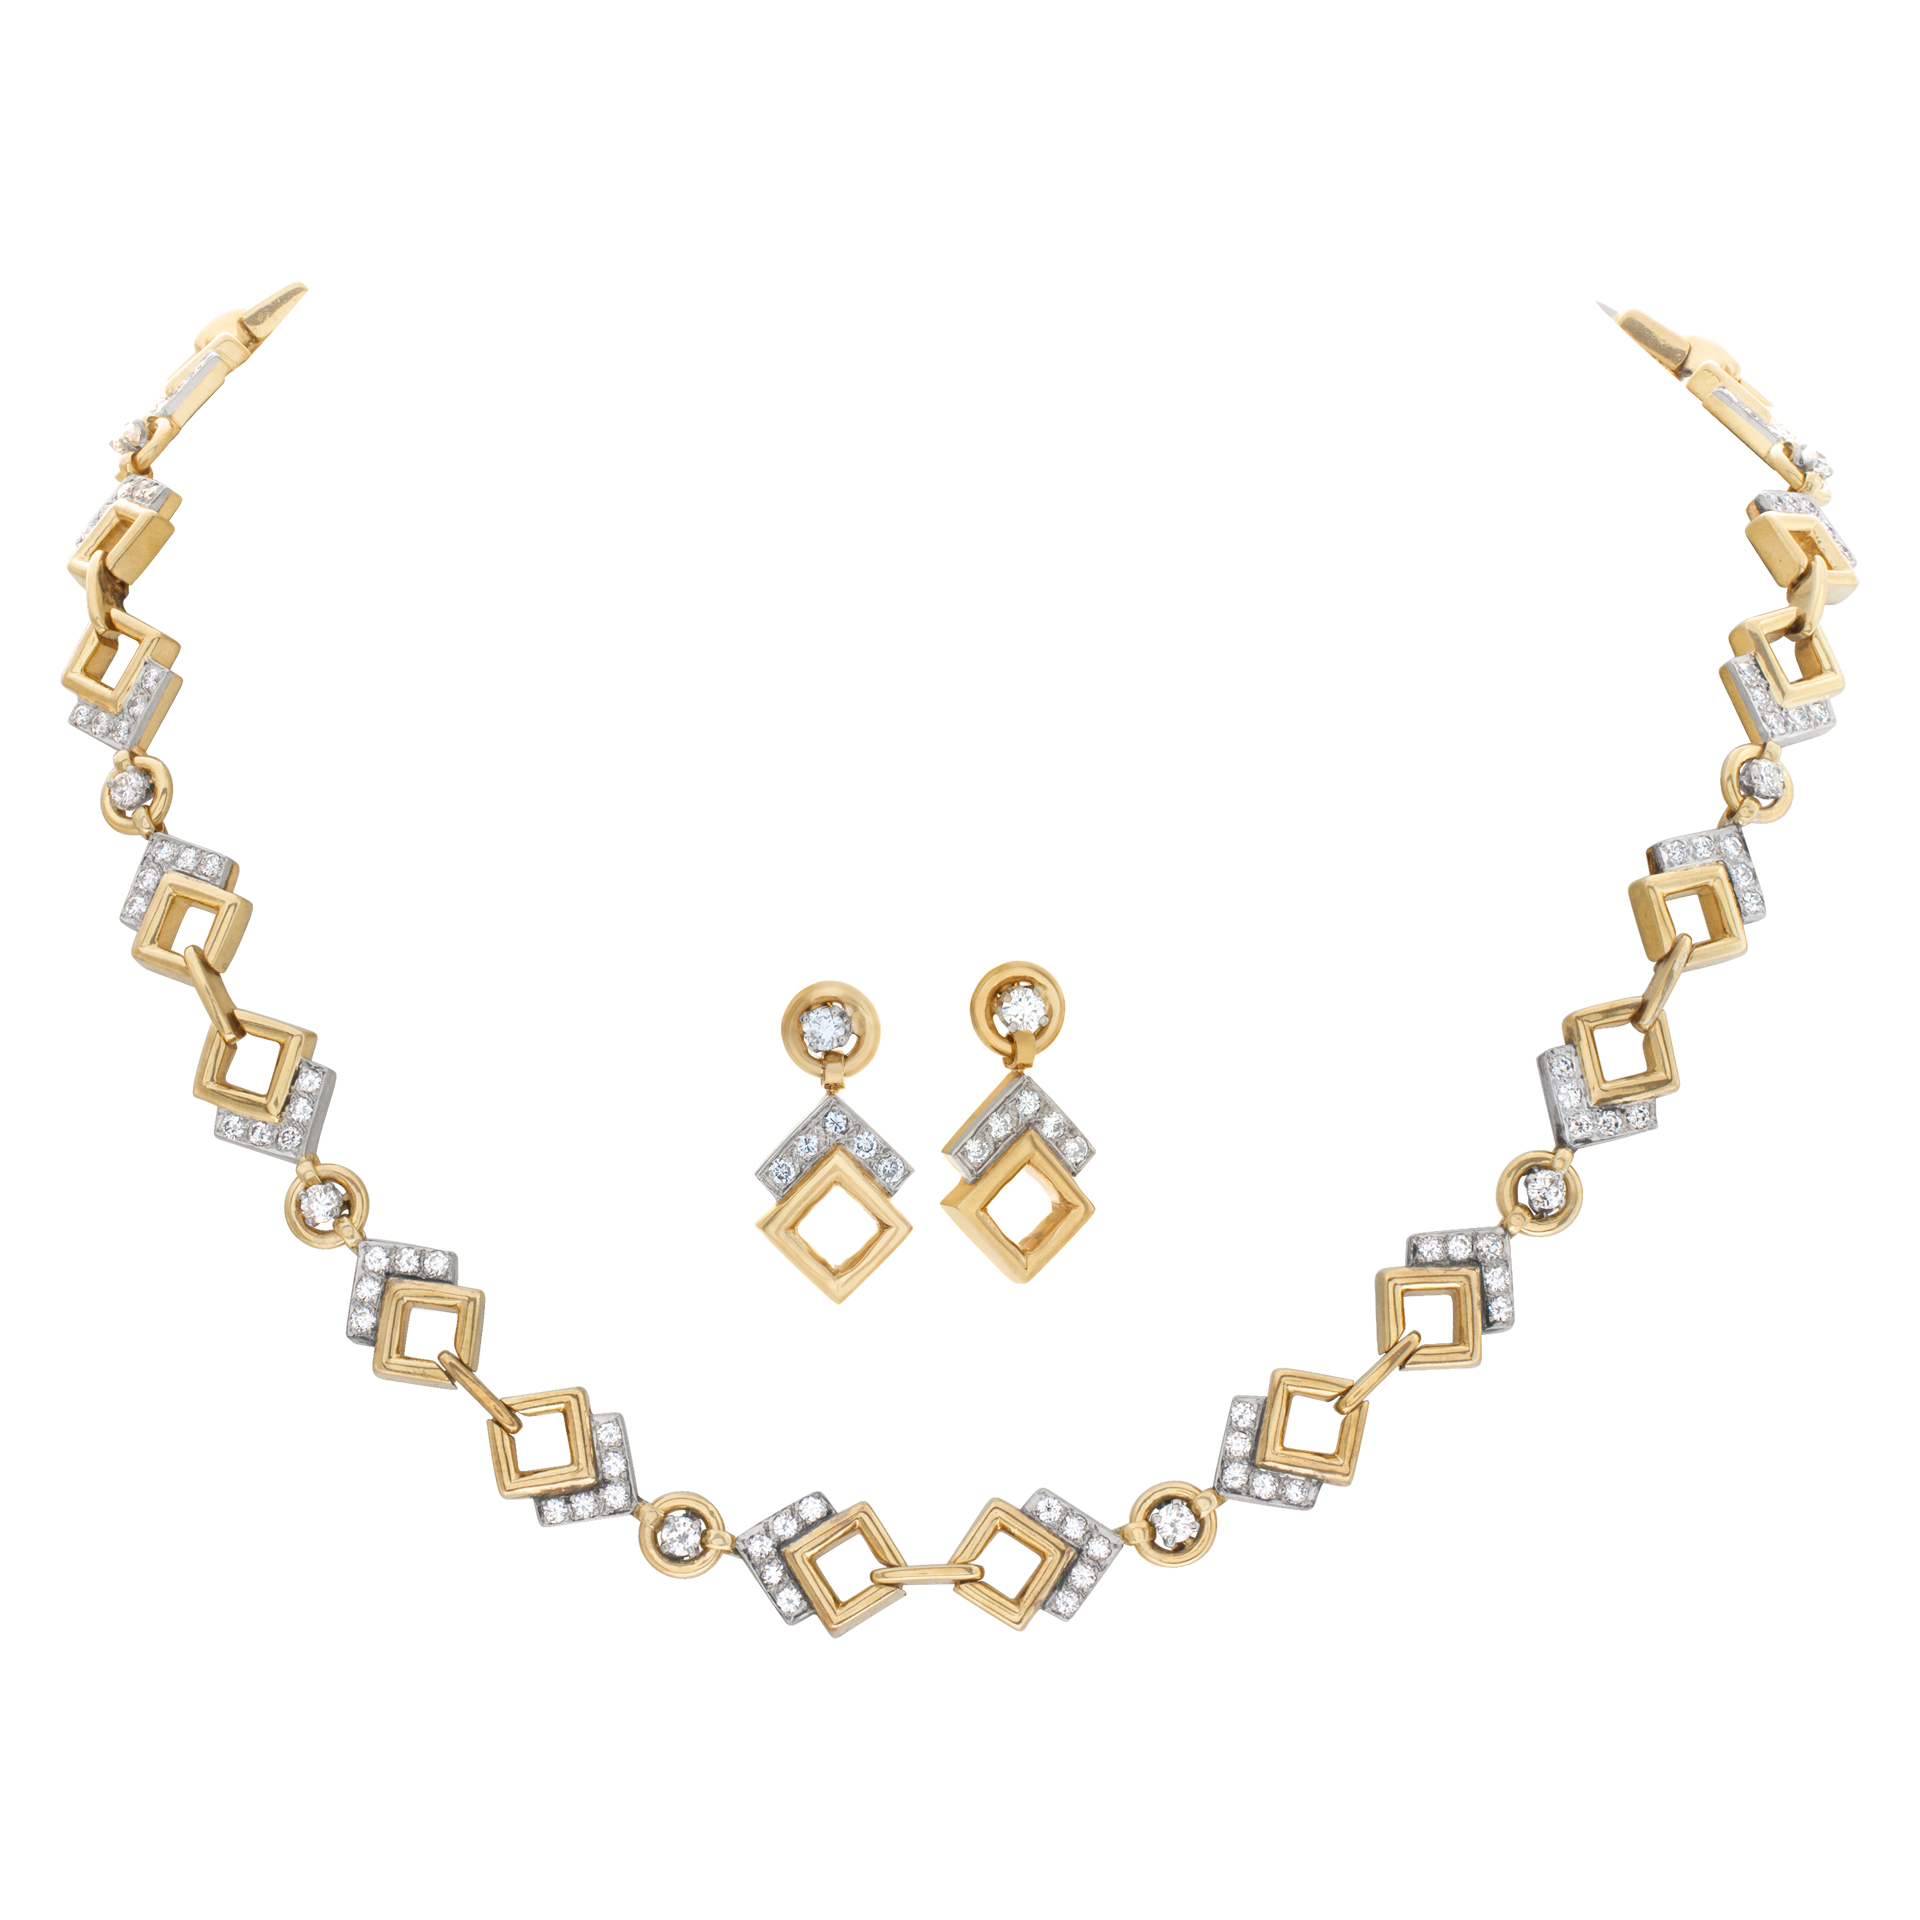 Geometric figures diamond necklace and earrings in 14k yellow and white gold image 1